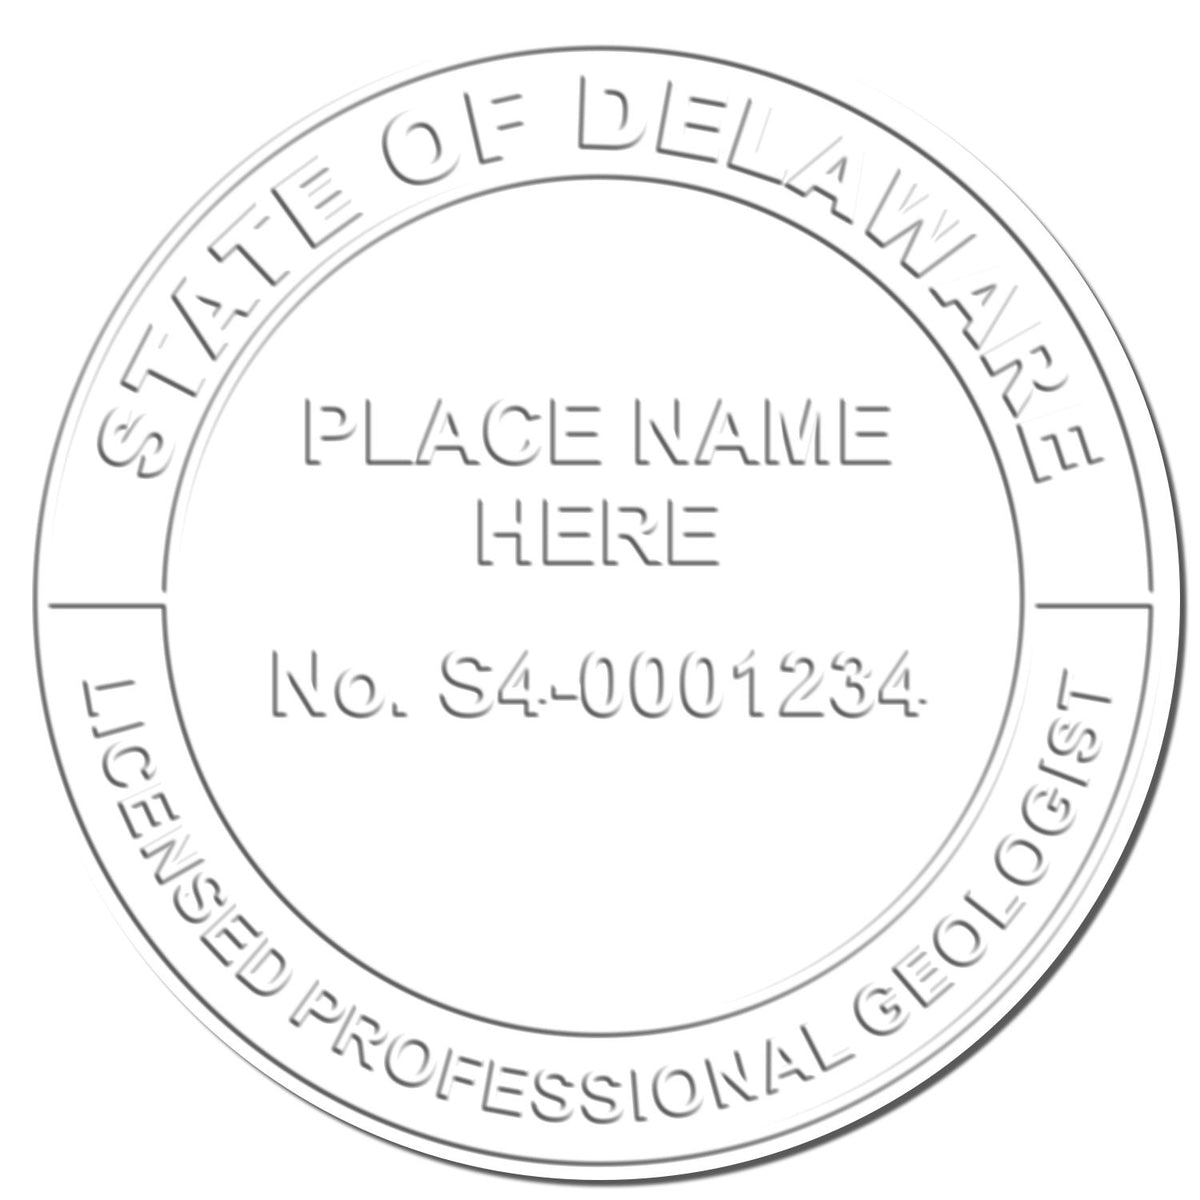 This paper is stamped with a sample imprint of the Handheld Delaware Professional Geologist Embosser, signifying its quality and reliability.